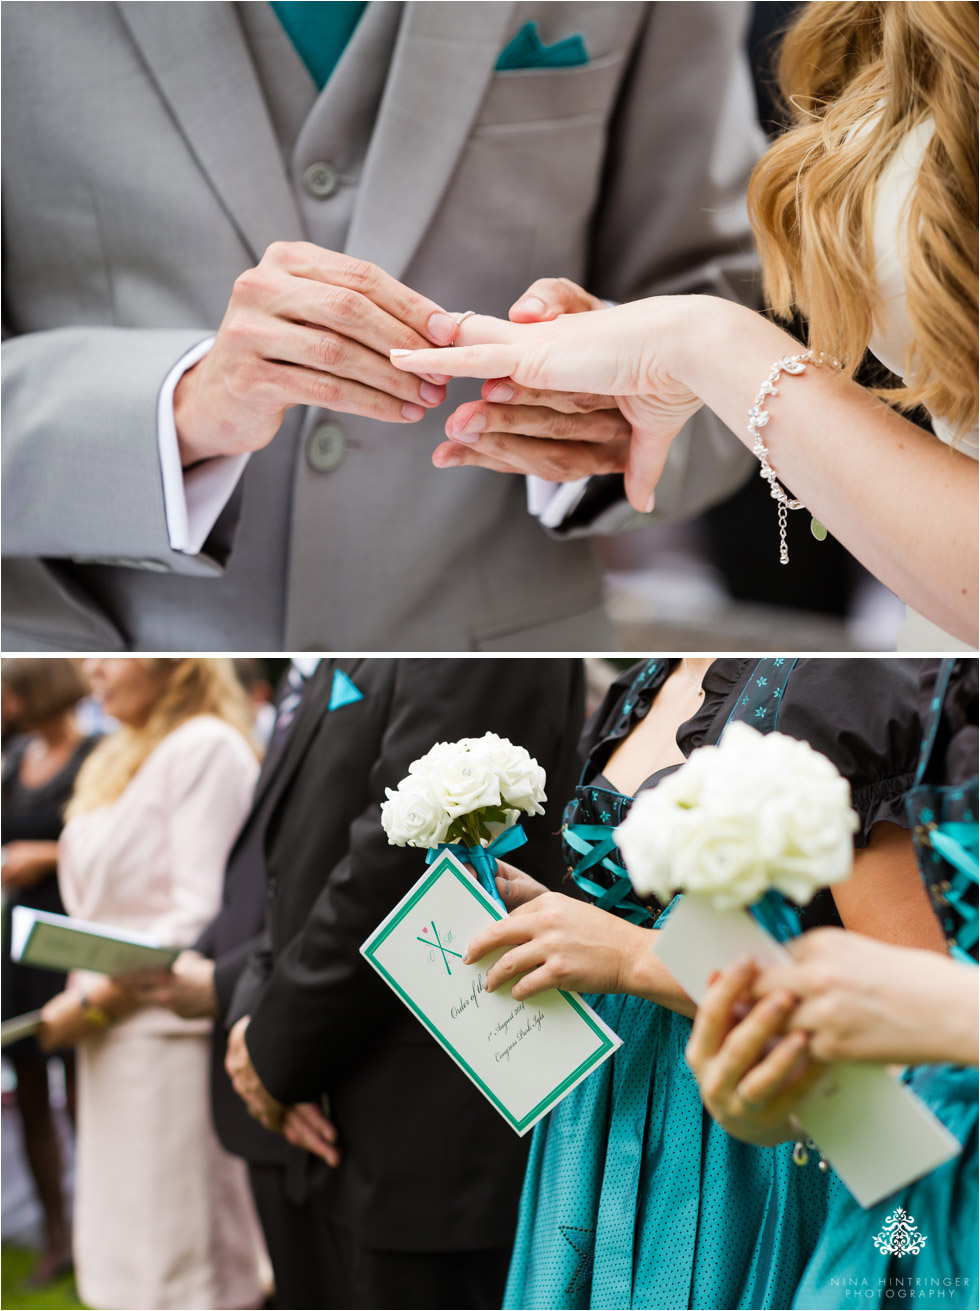 Ski-Inspired Summer Wedding | Cat & Menno and their Tiffany Blue Color Theme - Blog of Nina Hintringer Photography - Wedding Photography, Wedding Reportage and Destination Weddings